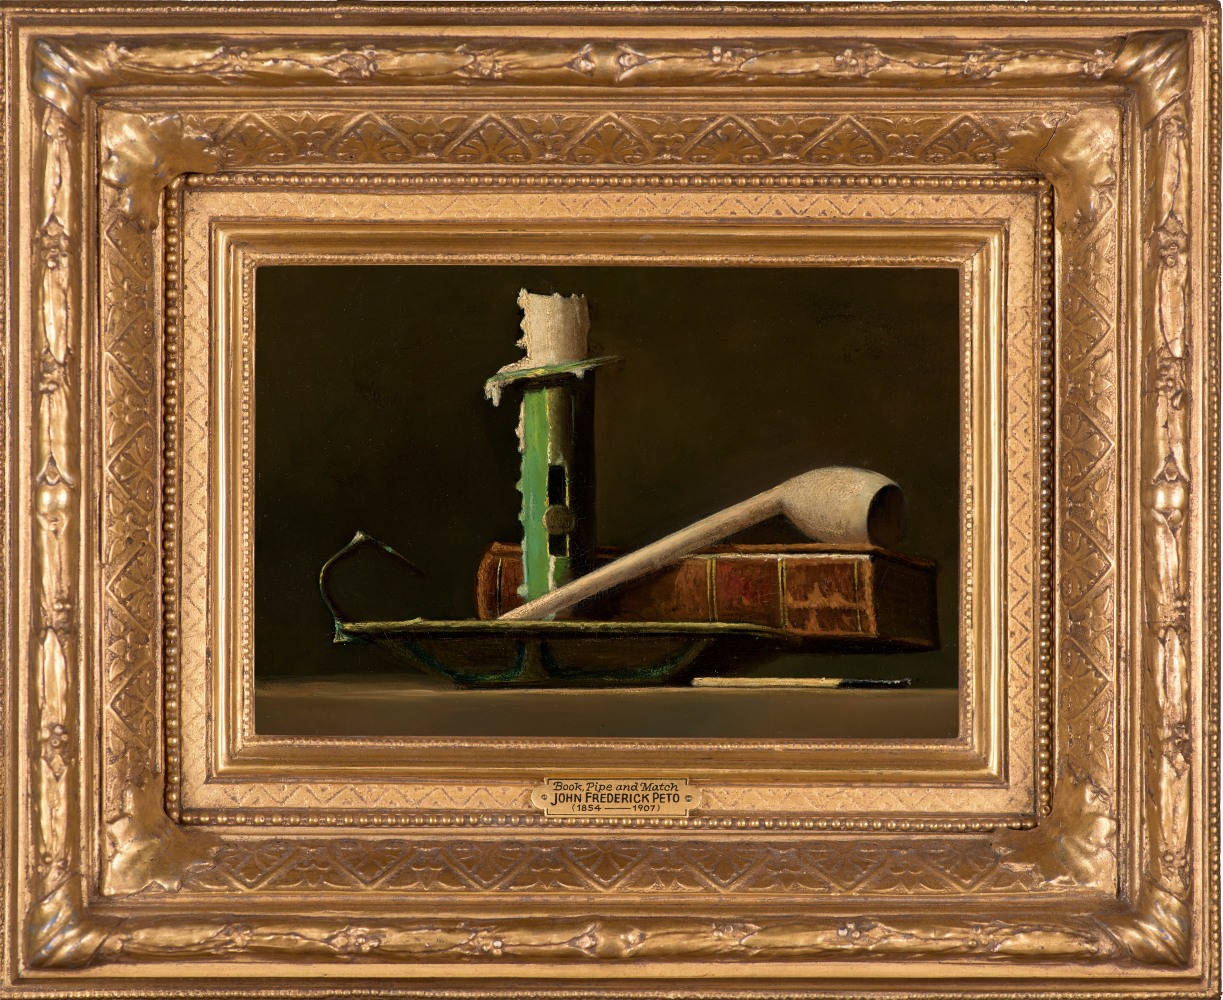 John F. Peto (1854–1907), Still Life with Green Candlestick and Book, c. 1890, oil on panel, 6 x 9 in. (framed)